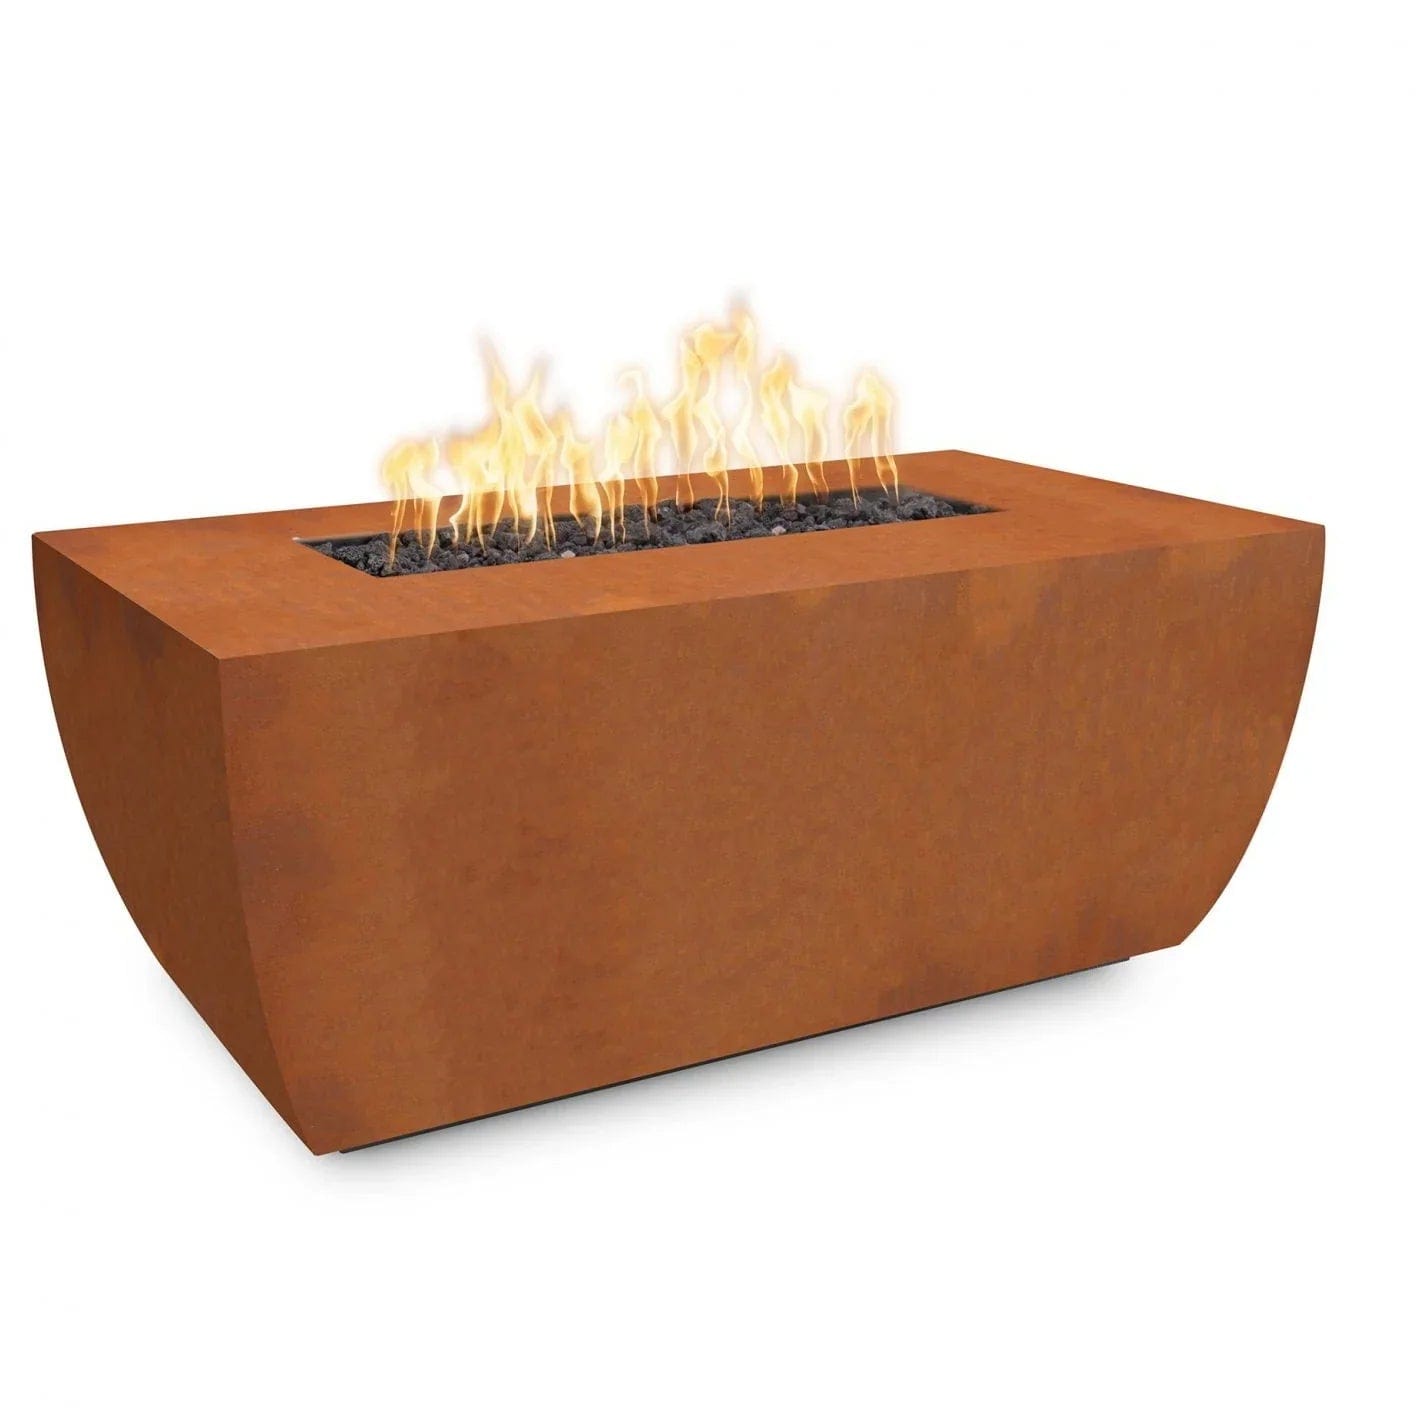 The Outdoor Plus Fire Pit 48" x 28" / Match Lit The Outdoor Plus Avalon 15" Tall Linear Fire Pit | Corten Steel OPT-AVLCS4815